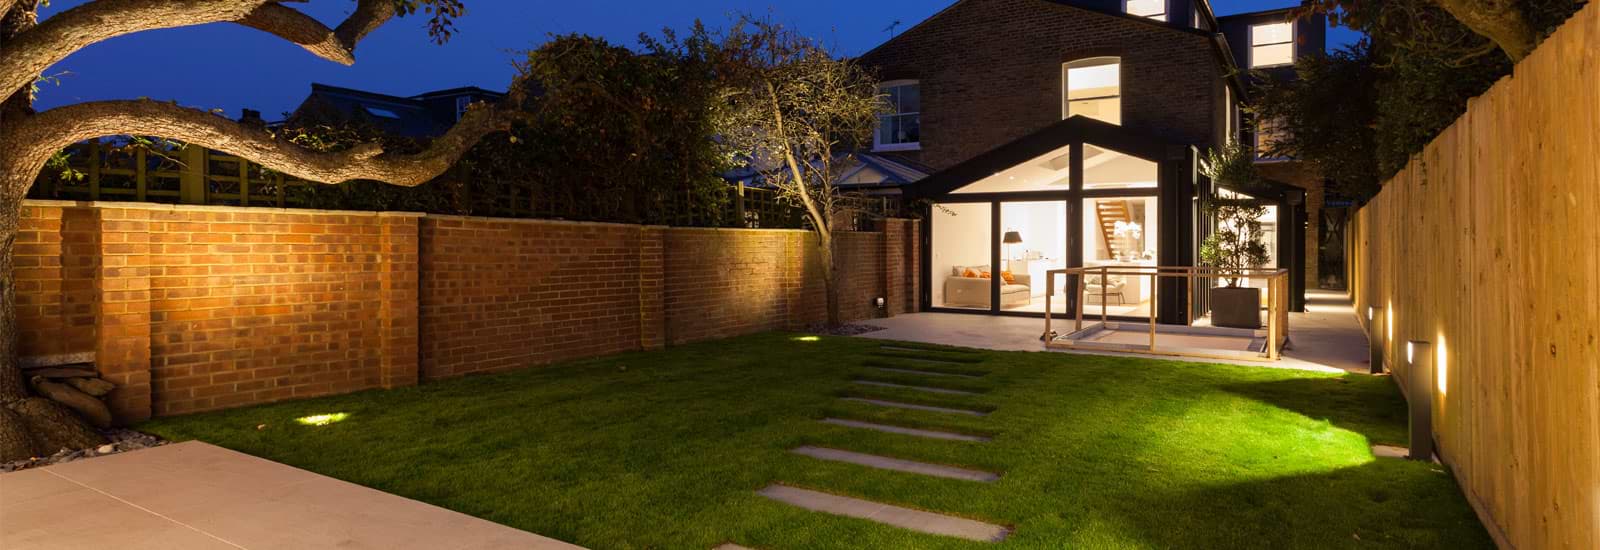 London Extension Architects